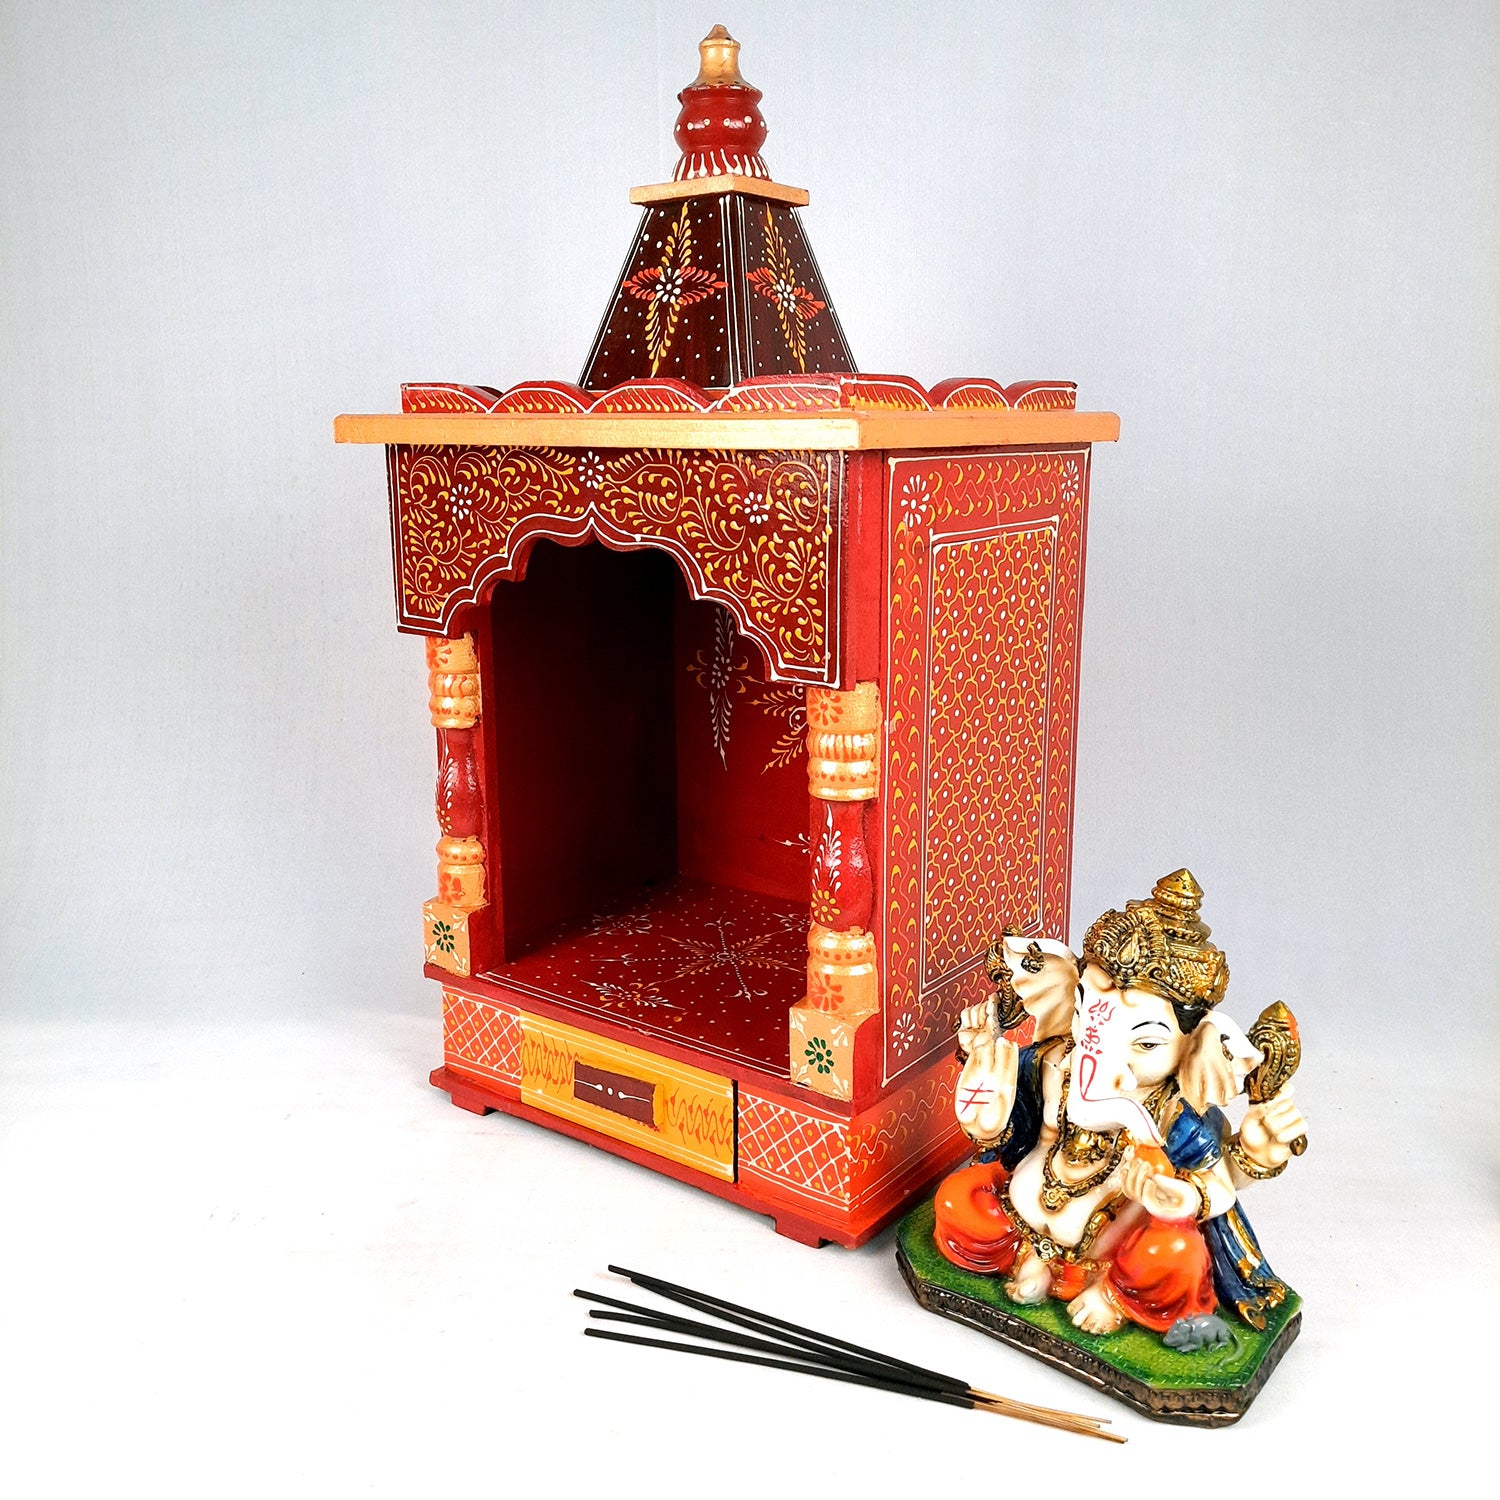 Pooja Temple Wooden With Storage Drawer | Big Mandir For Home | Puja Stand Mandap Wall Mounted – For House, Ghar, Office, Shop - 23 Inch